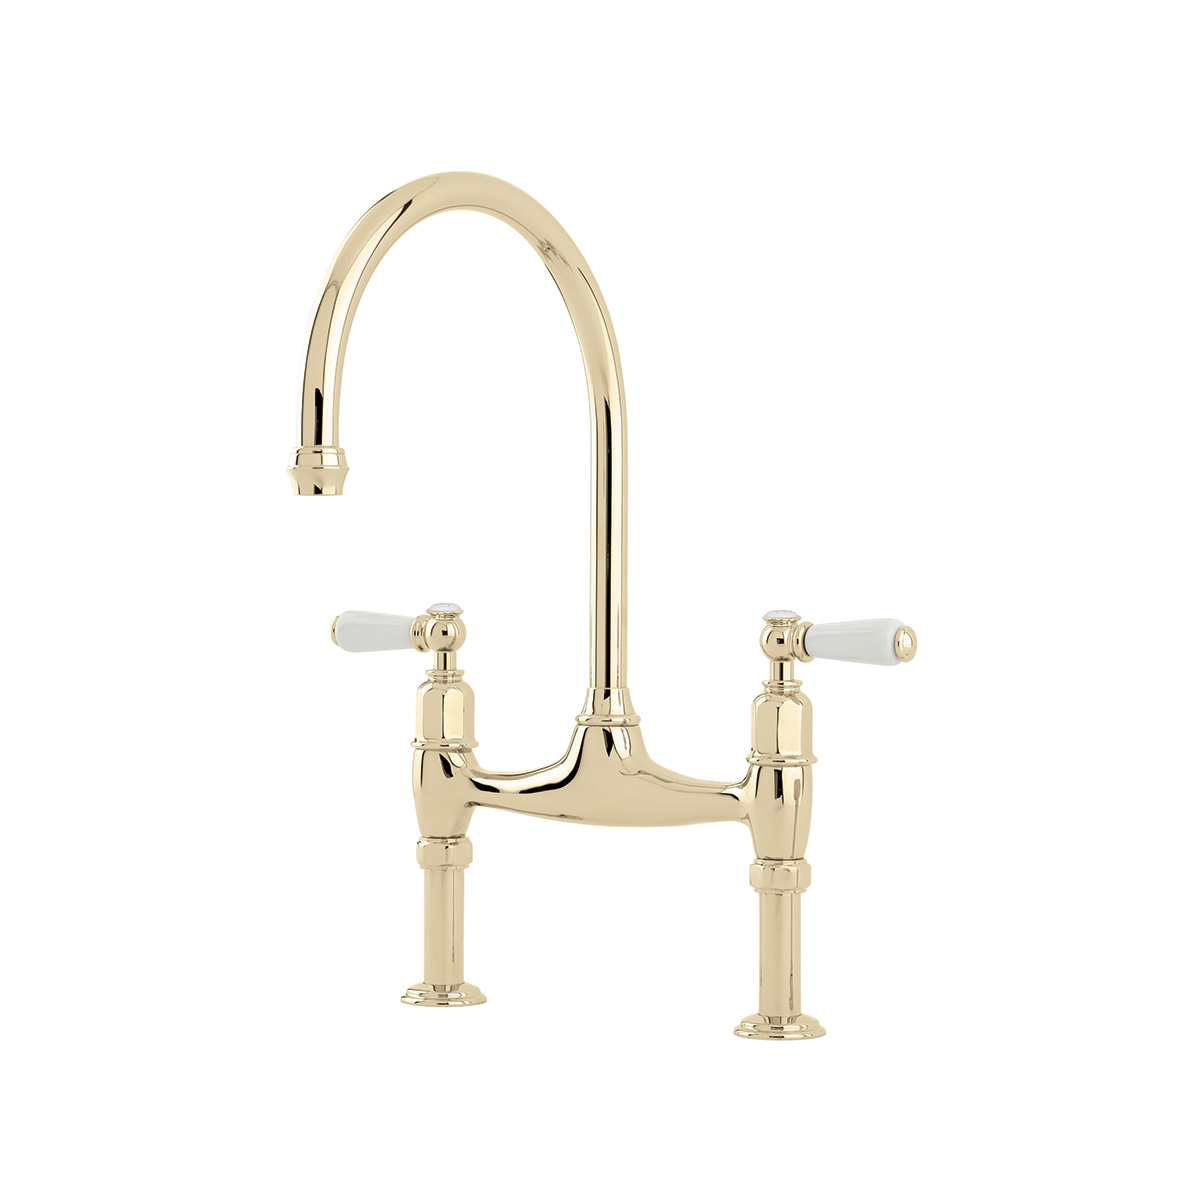 Shaws by Perrin & Rowe Pendleton bridge mixer in gold. Ionian style kitchen tap with straight unions AUSH.4193. Distributed in Australia by Luxe by Design, Brisbane.